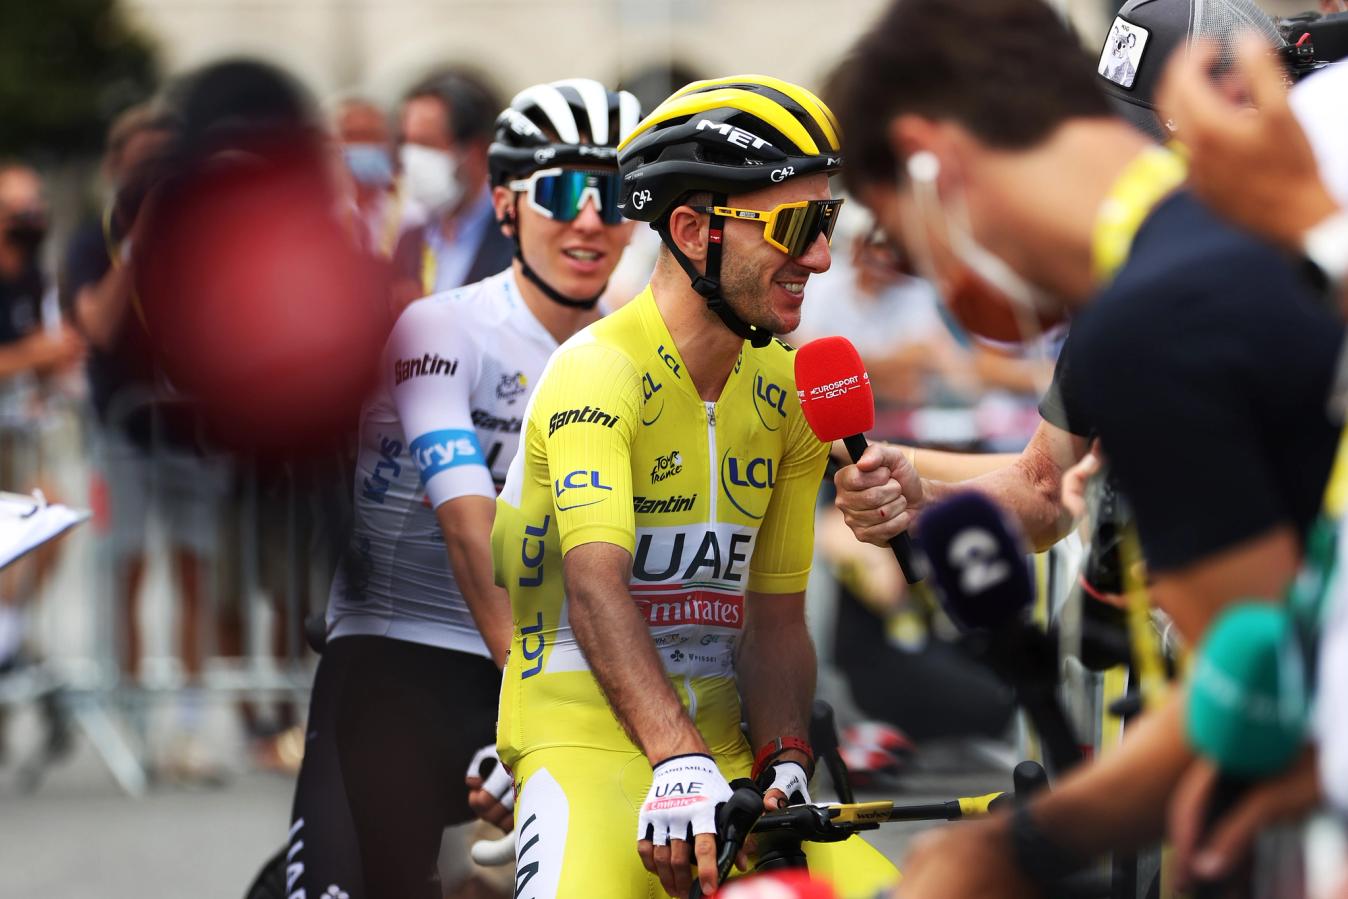 Adam Yates may have been the only one of the pair to pull on yellow this season, but there is never any doubt as to where Yates' loyalties lie when it comes to Tadej Pogačar